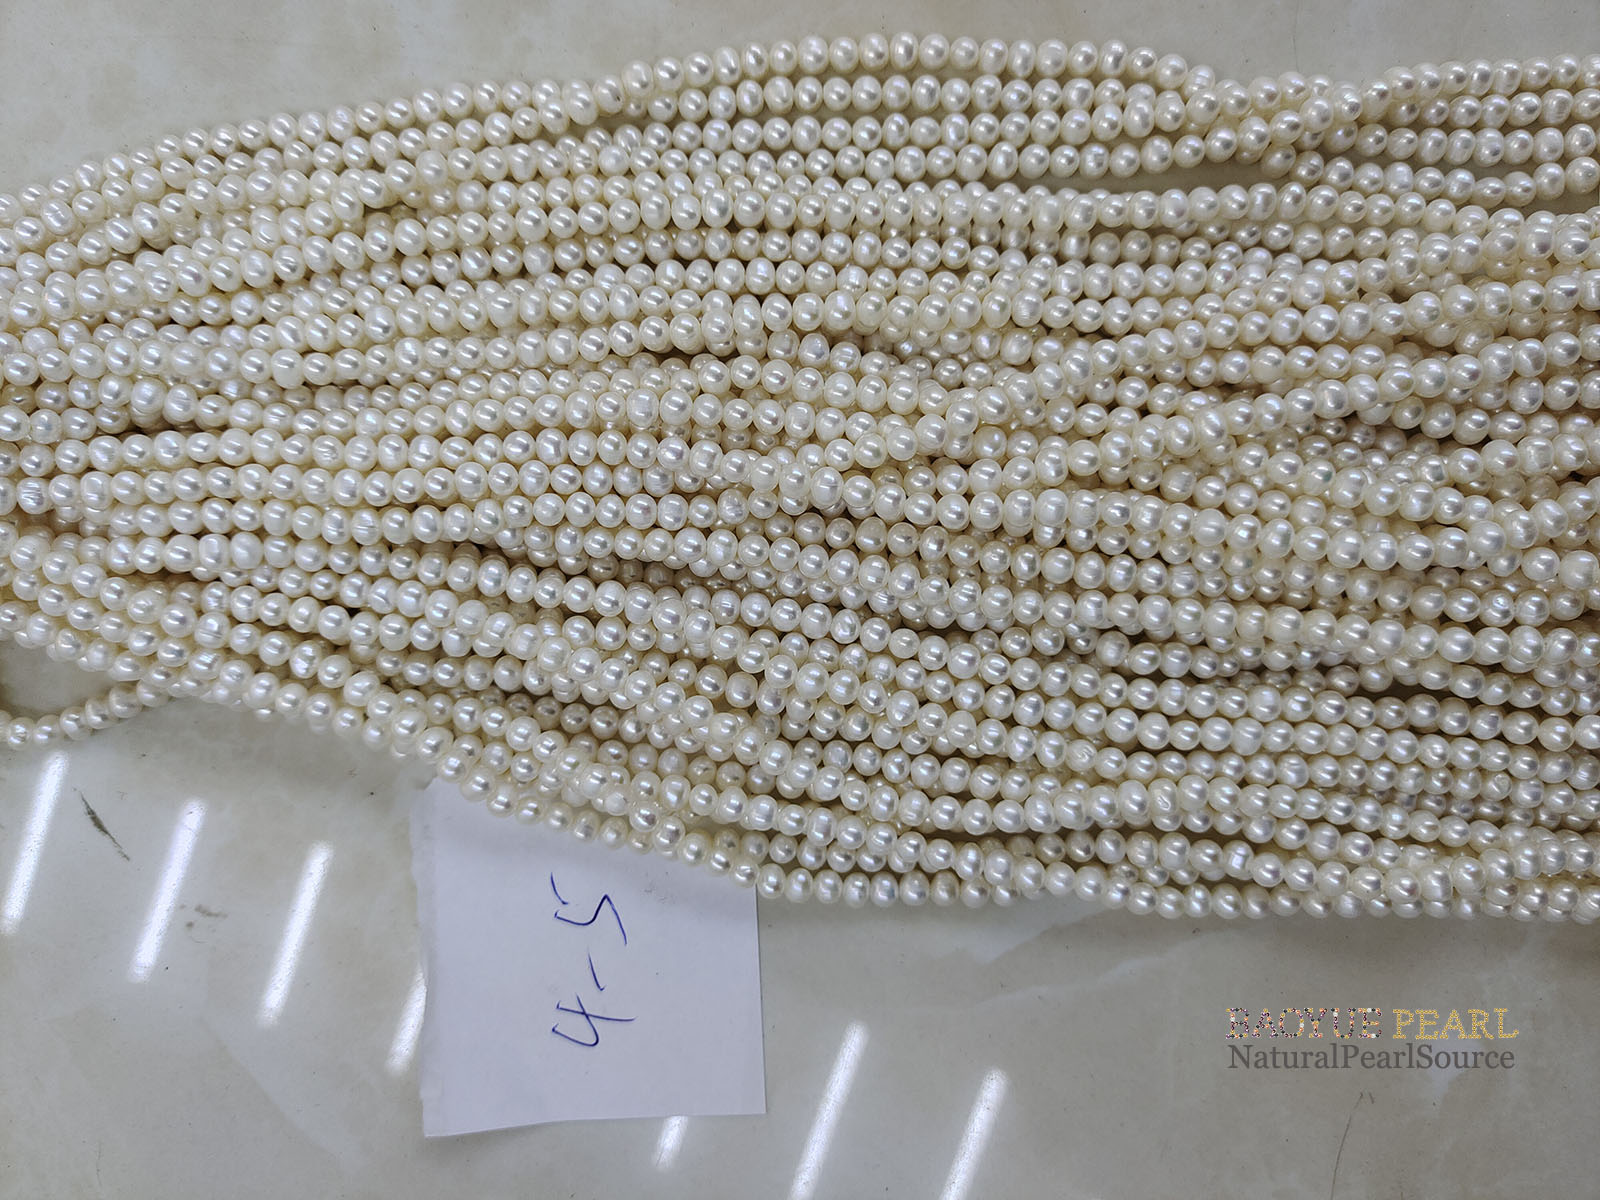 16 inch 3-12 mm Natural Pearls Wholesale good luster freshwater pearl in strand,egg shape wholesale loose freshwater pearl in strand